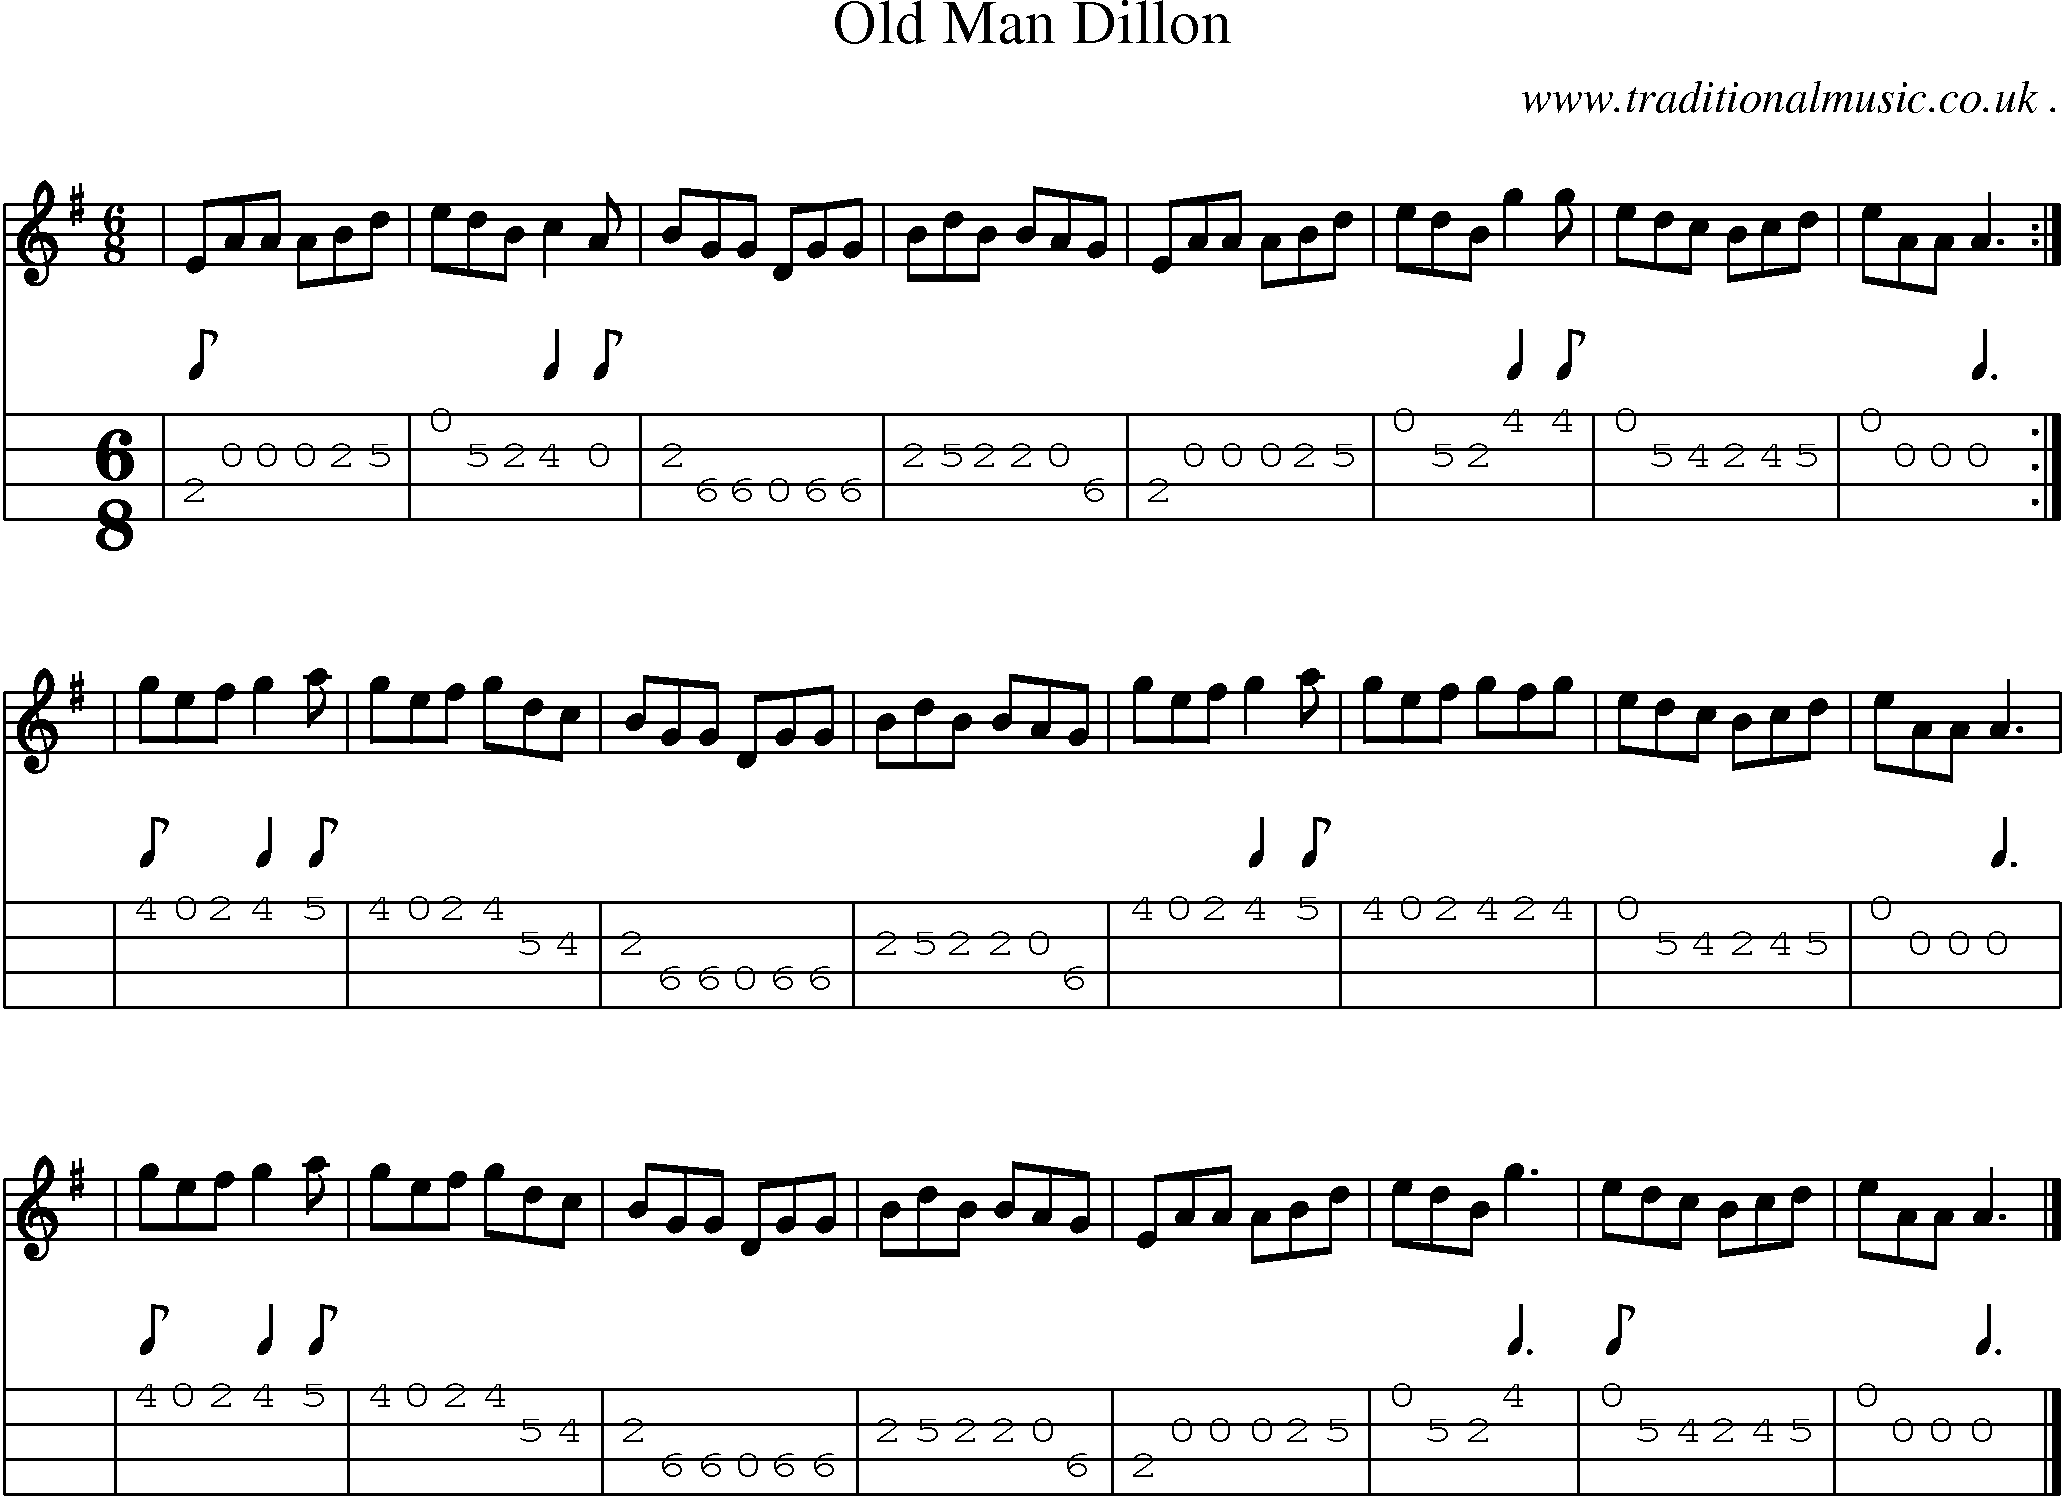 Sheet-music  score, Chords and Mandolin Tabs for Old Man Dillon